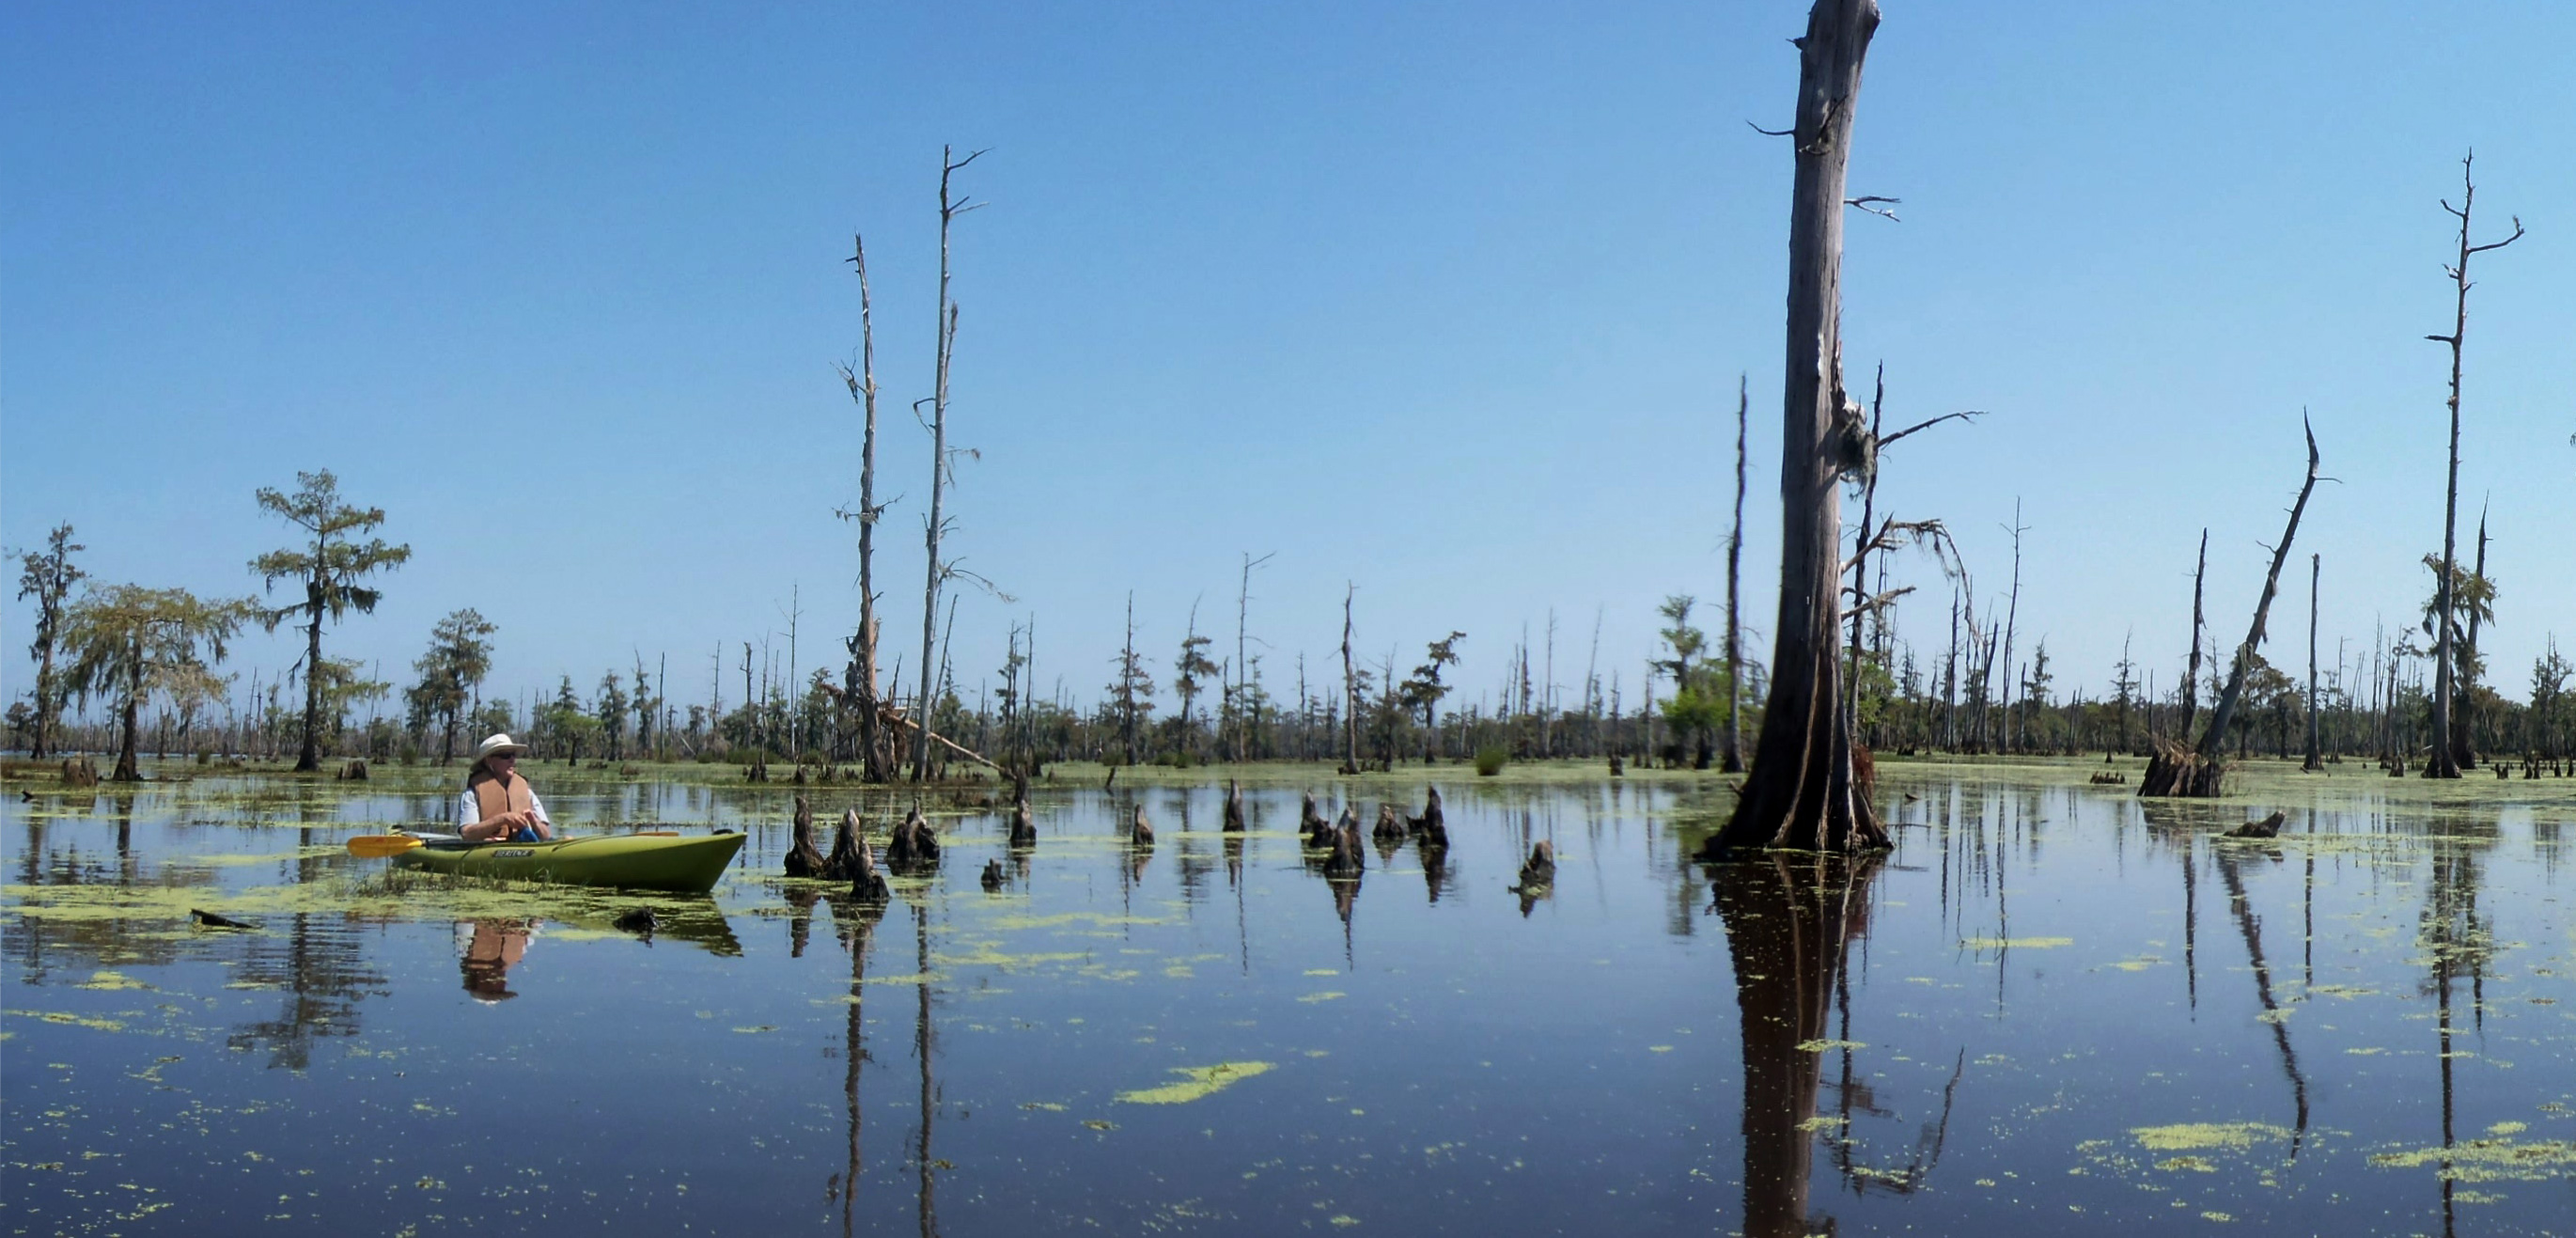 Paddling in a Louisiana bayou, amid drowned trees and a wealth of wildlife, can make you “forget about civilization,” says author Richard Goodman. Photo by John Hazlett